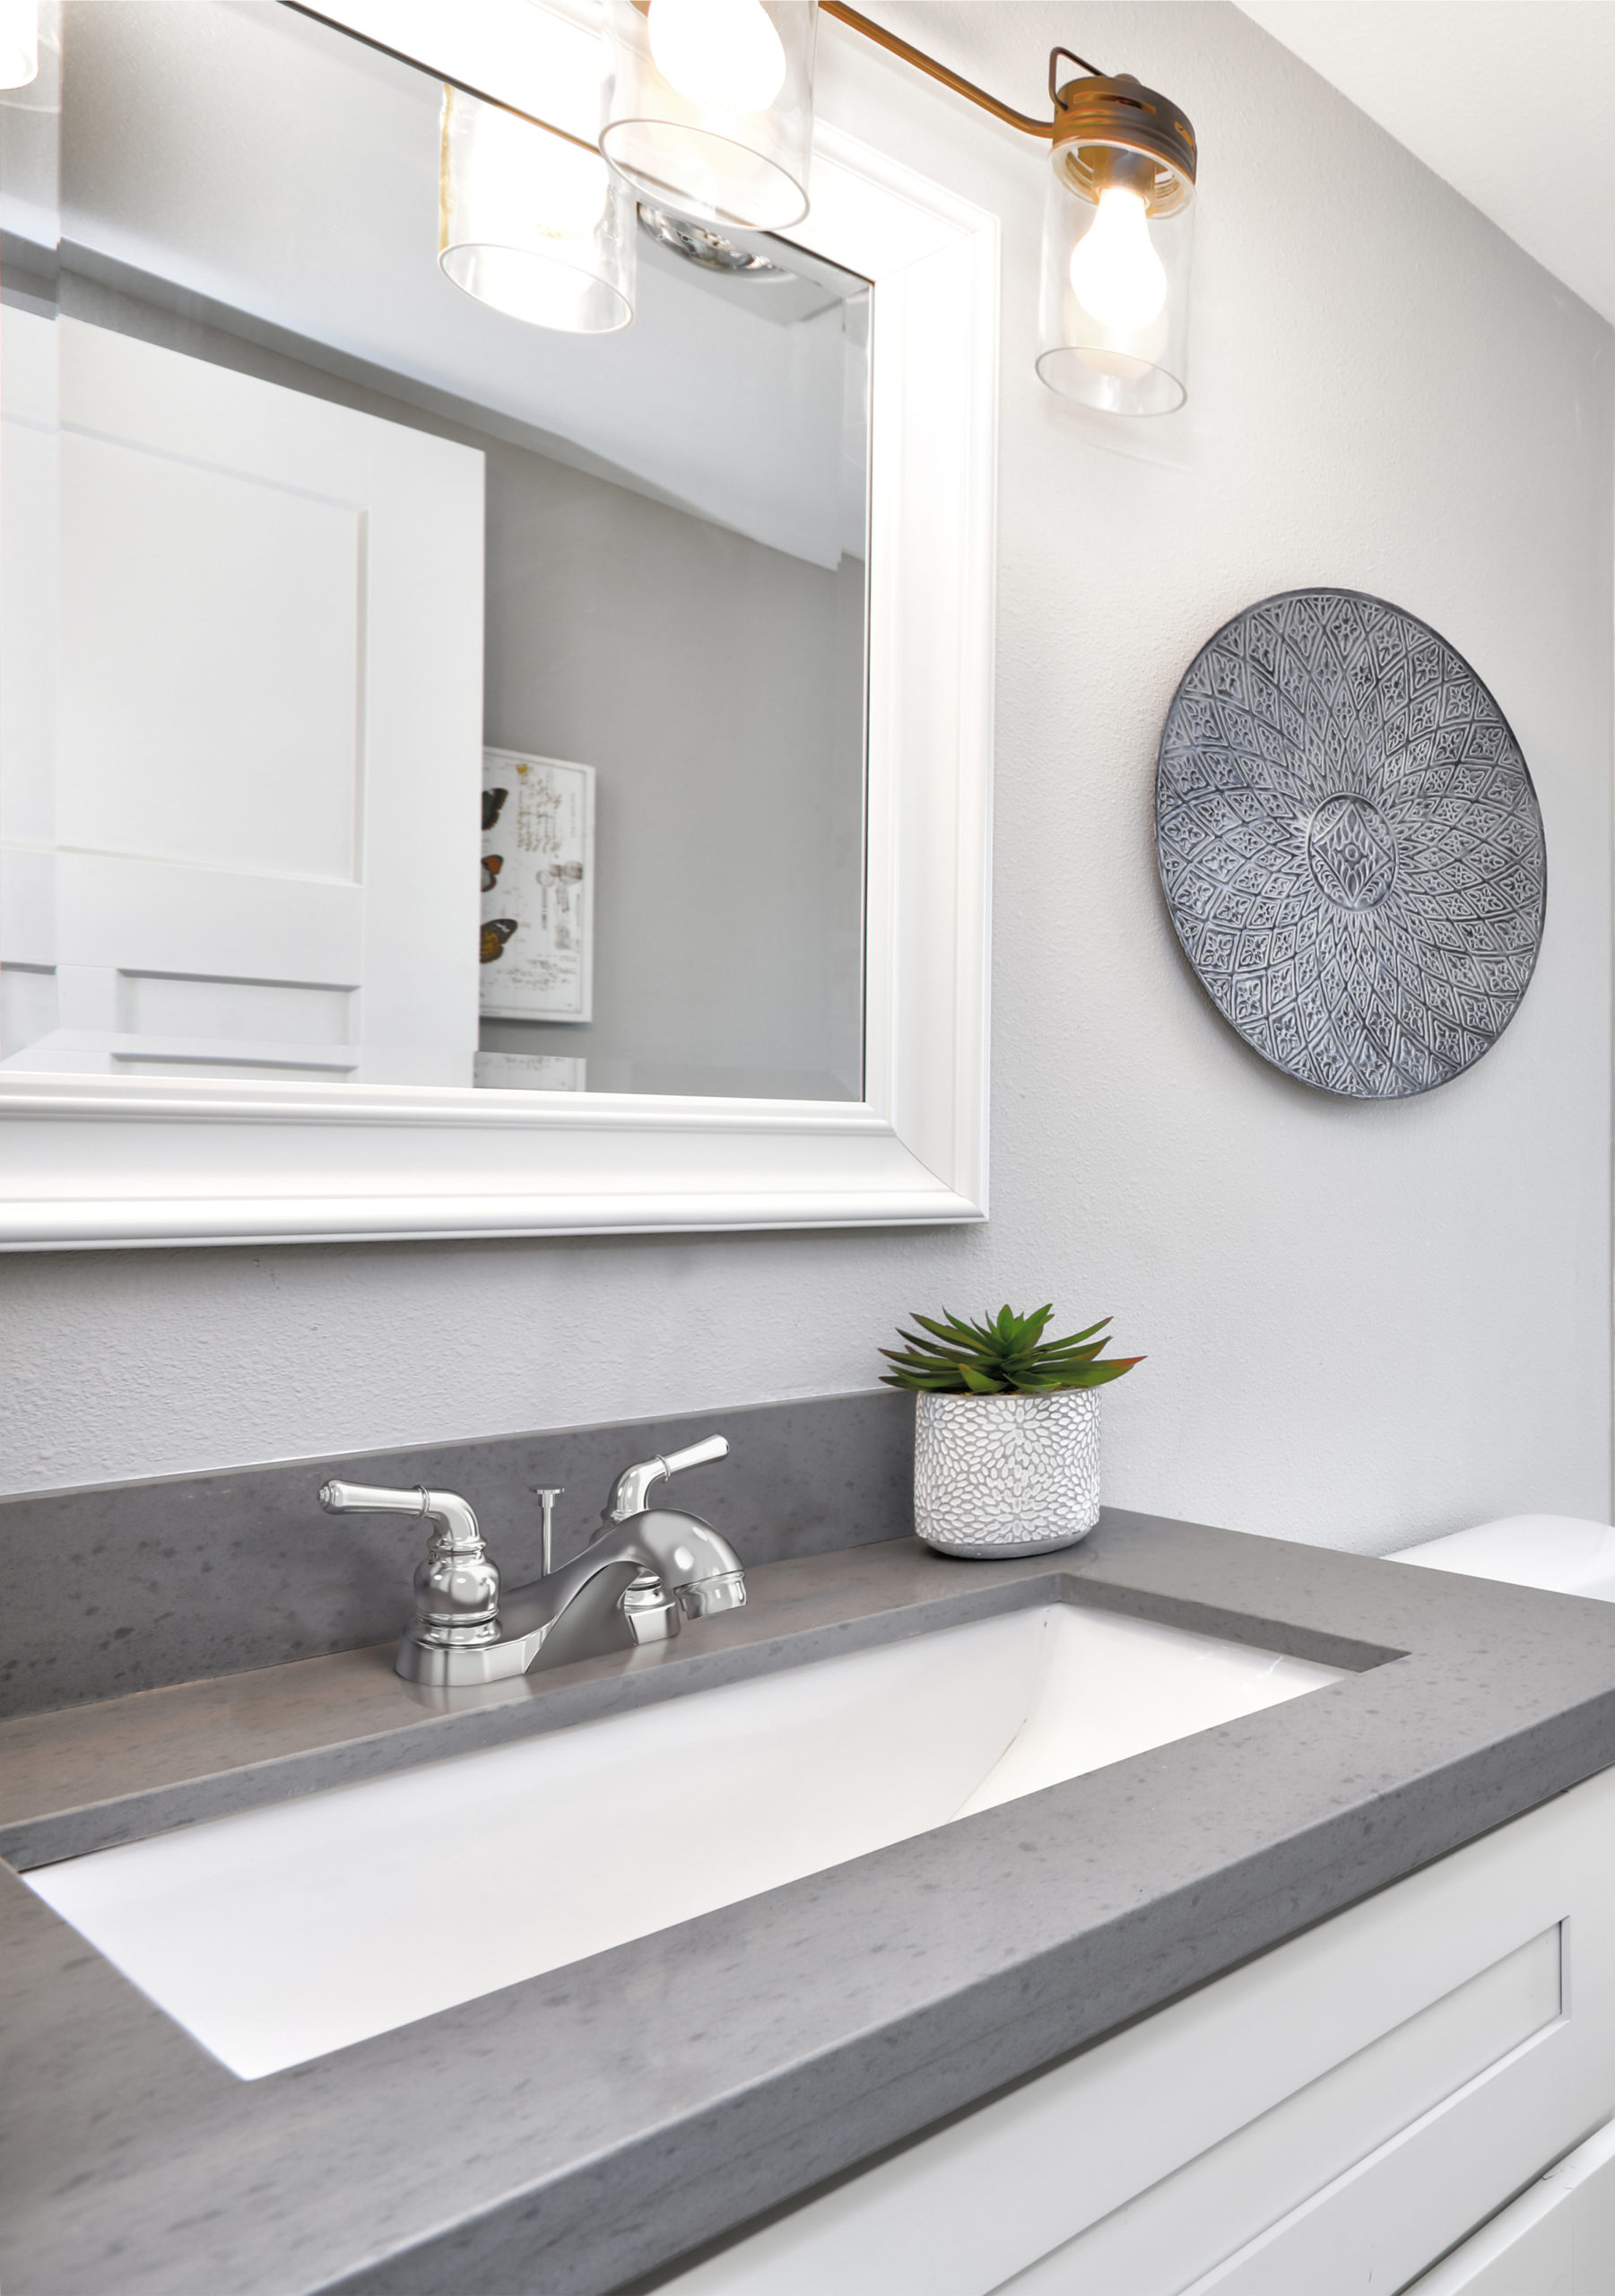 This vanity features white cabinetry, a grey countertop, silver faucet, a white-framed mirror, a plant and wall art.